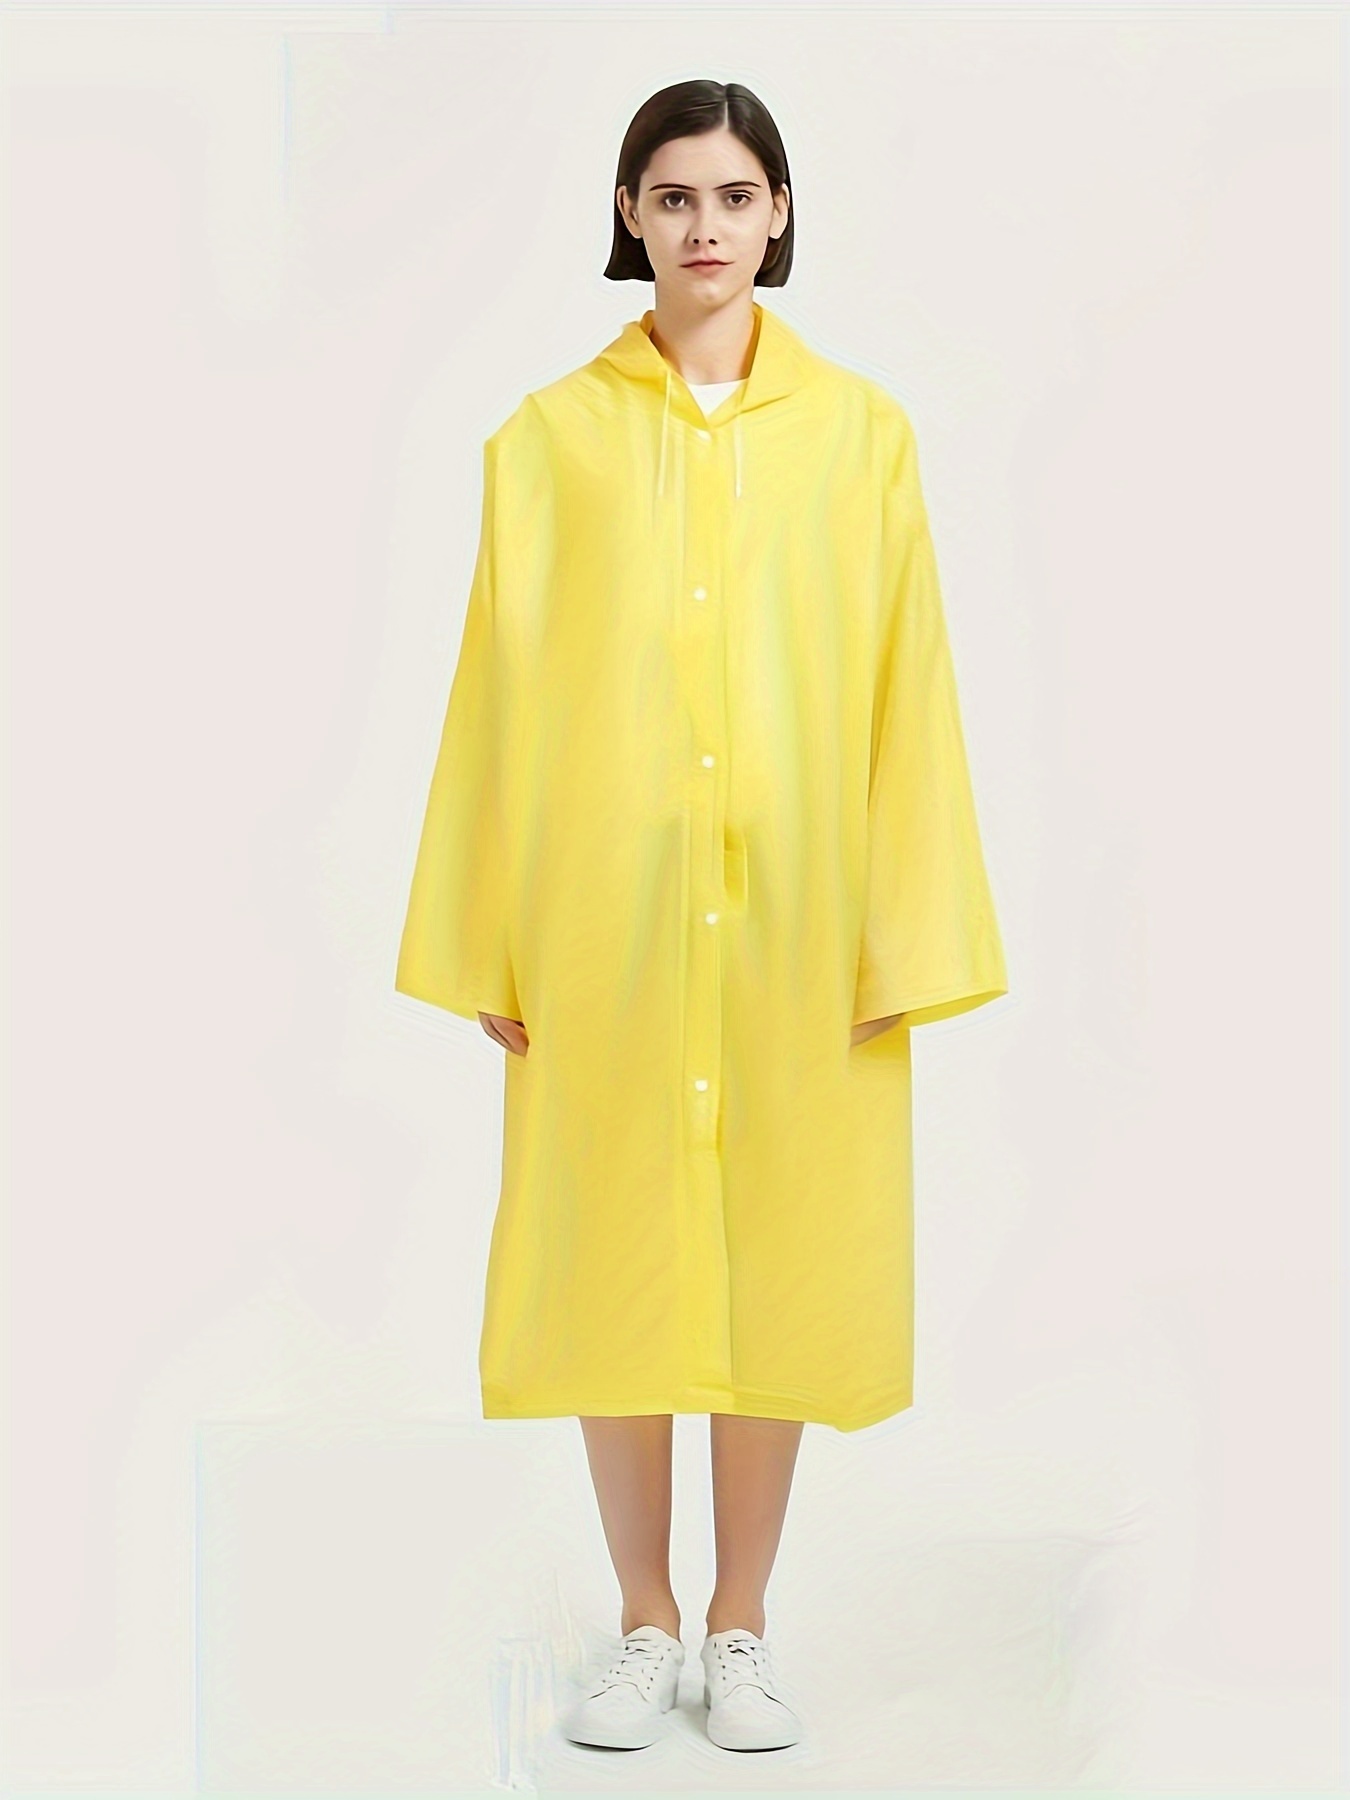 fashionable and lightweight reusable raincoat travel poncho for women thickened eva material provides ultimate protection from rain and wind ideal for outdoor activities details 17